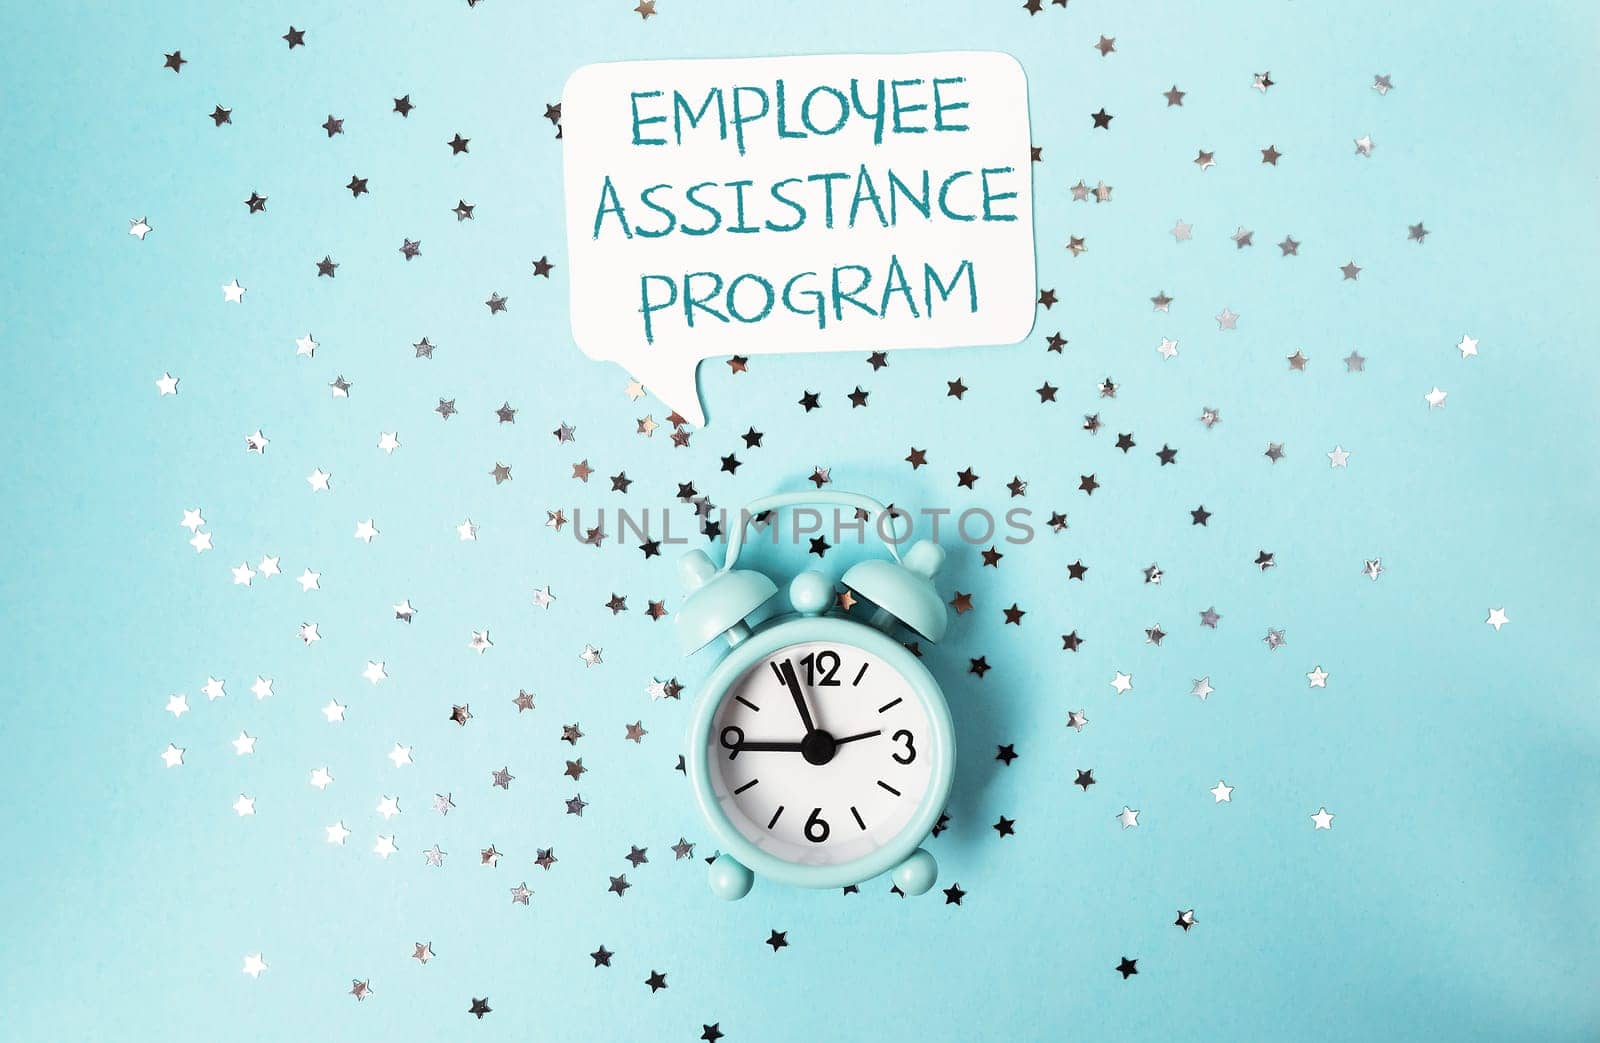 A clock with the words Employee Assistance Program written above it. The clock is on a blue background with a lot of stars